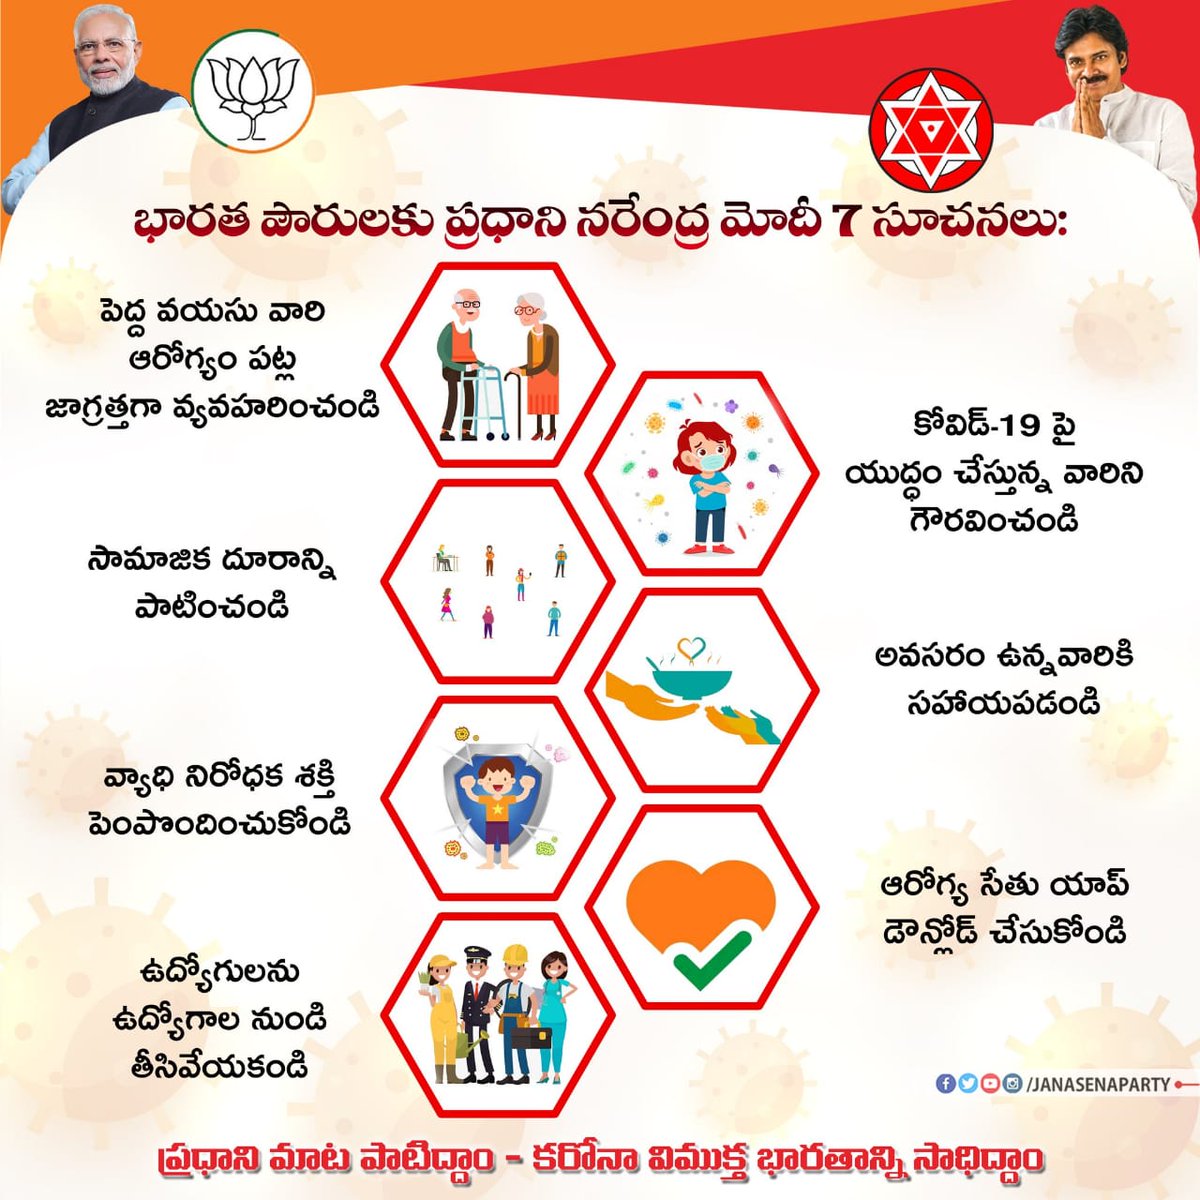 Let us follow this
a re-adapted #Saptapati from @narendramodi
1 Care for elders
2 Stay within Laxman Rekha
3 Use homemade masks
4 Follow precautions & use #AarogyaSetu app
5 Extend help to the poor
6 Pls don’t lay-off employees 
7 Respect doctors & medical workers. @PawanKalyan